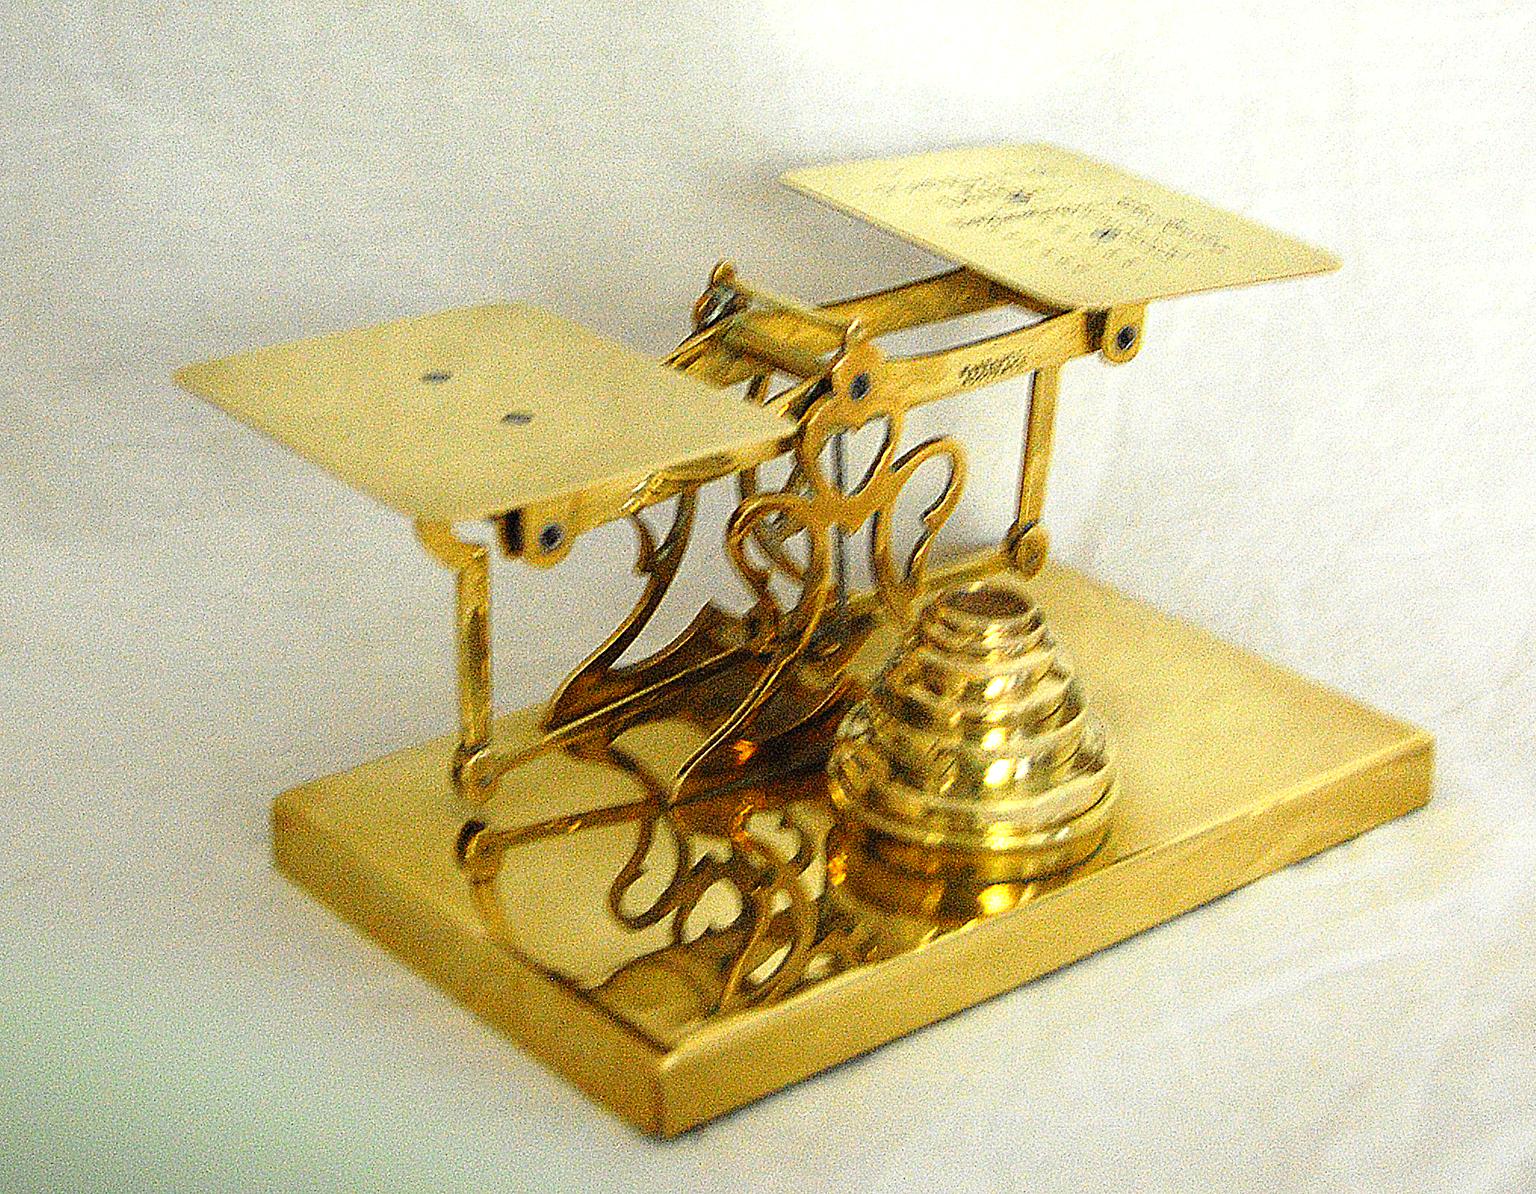 English 19th century brass postal scale on brass base by Sturner and Sons, postal rates for letters are engraved on one balance pan, signed with Sturner's emblem. There are 6 assembled brass stacking weights from various makers: 8 oz, 4 oz, 2 oz, l